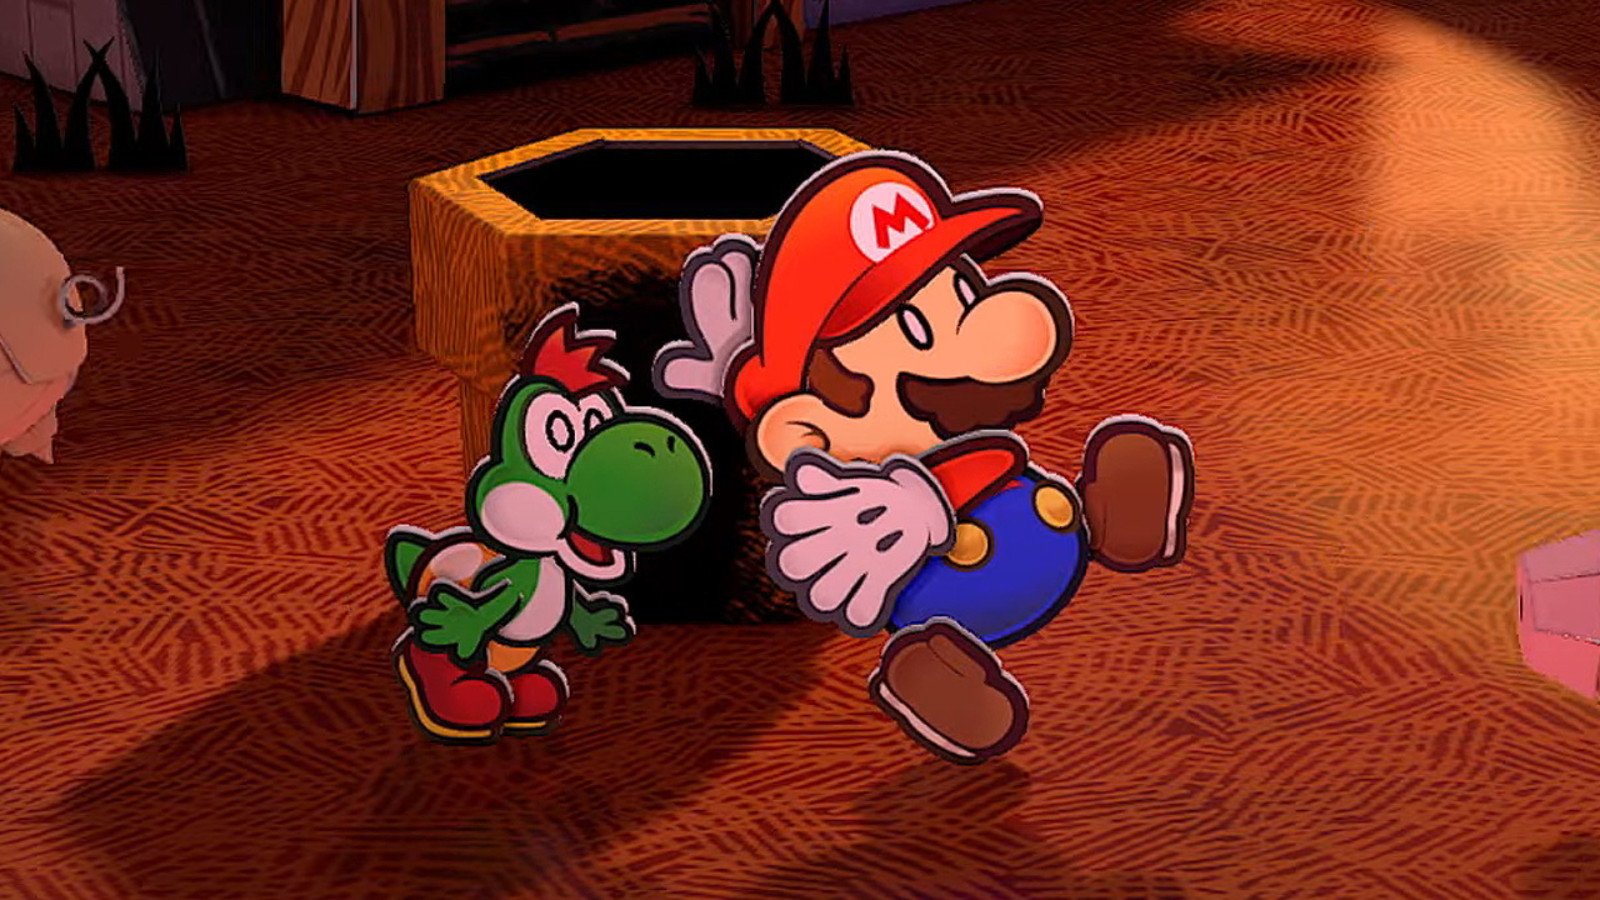 The remake of Paper Mario has undergone several “censorships”